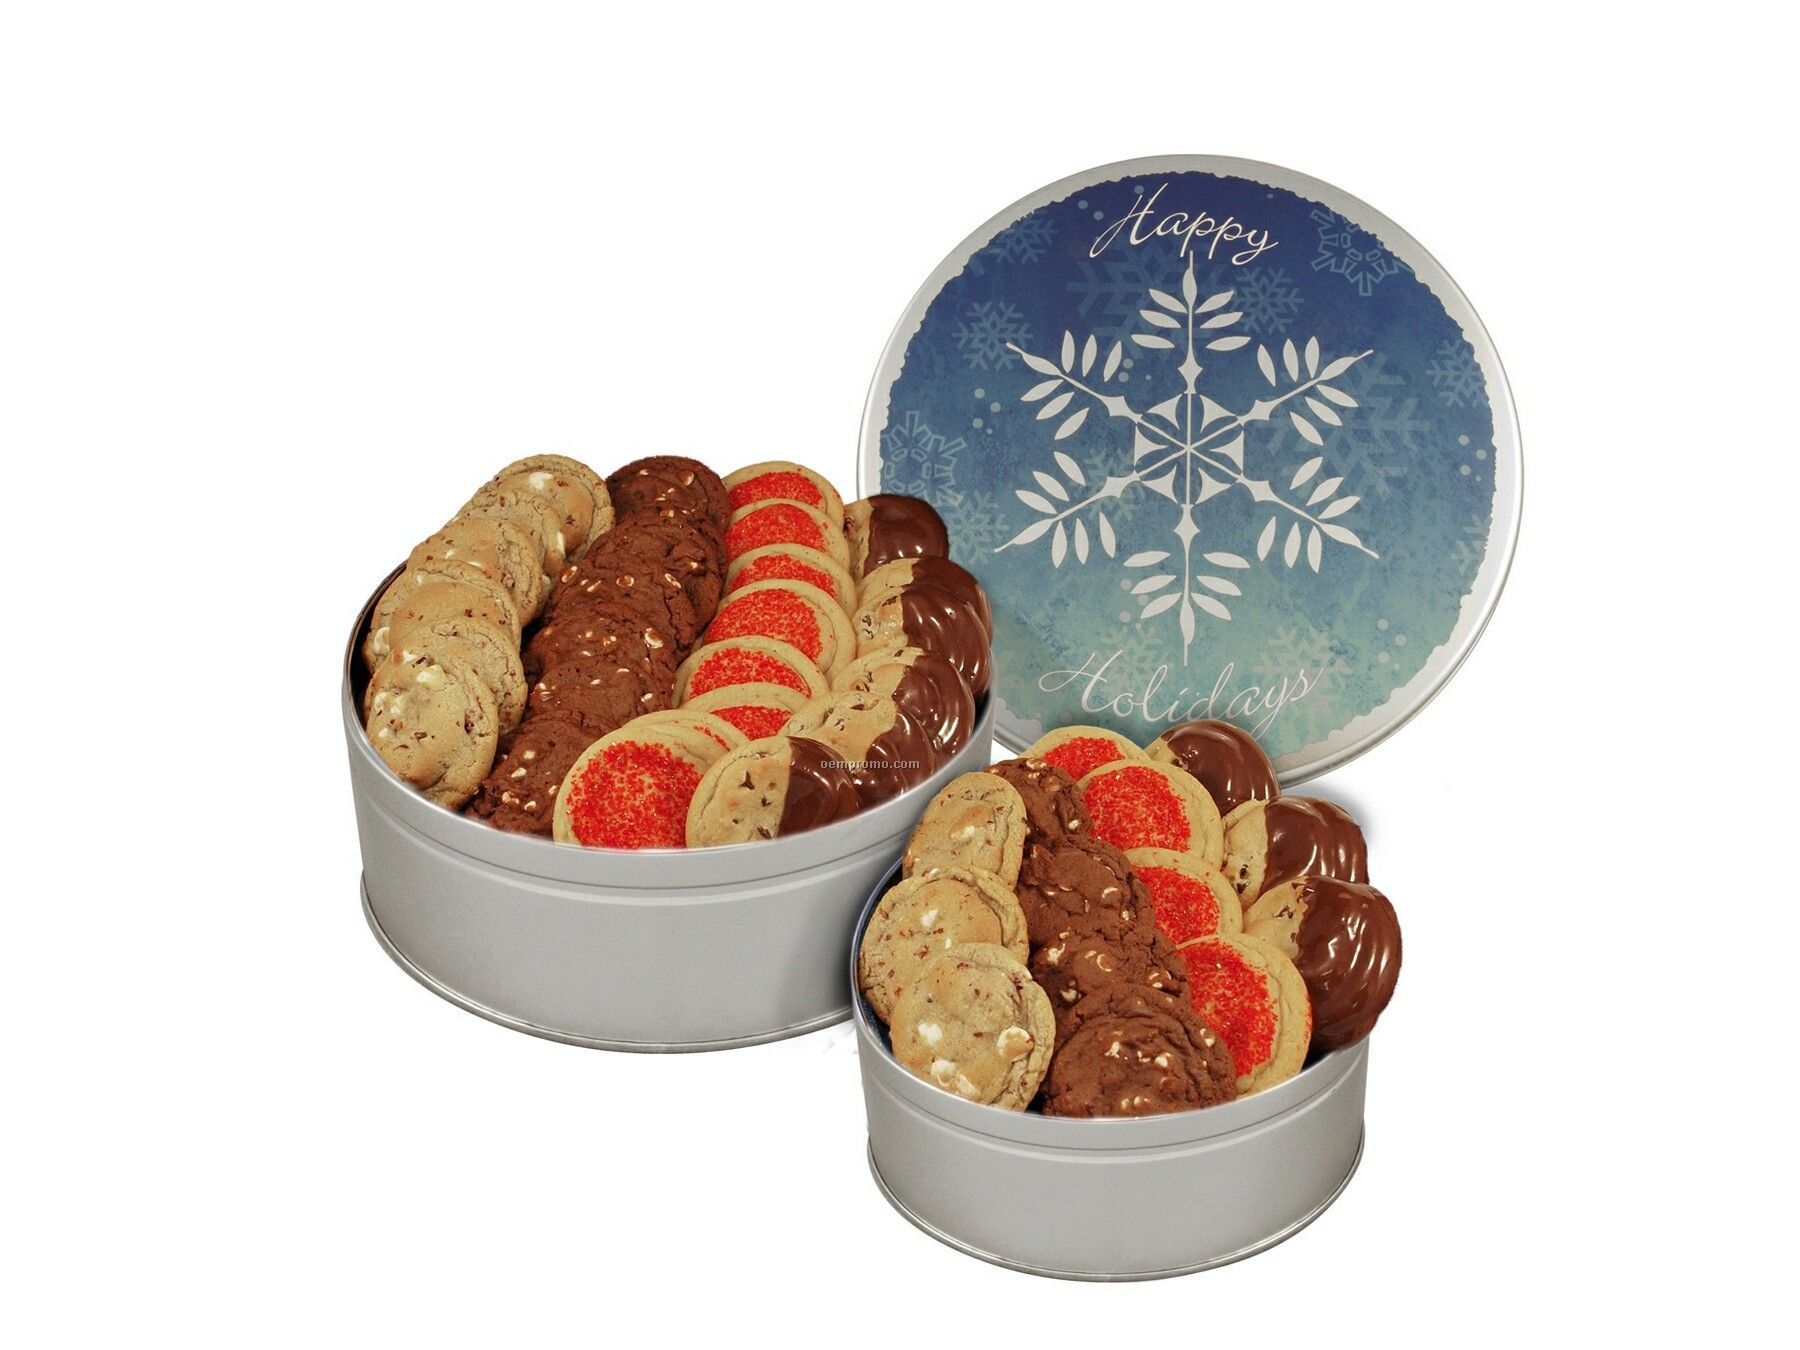 Gourmet Holiday Cookie Assortment (28 Oz. In Regular Canister)